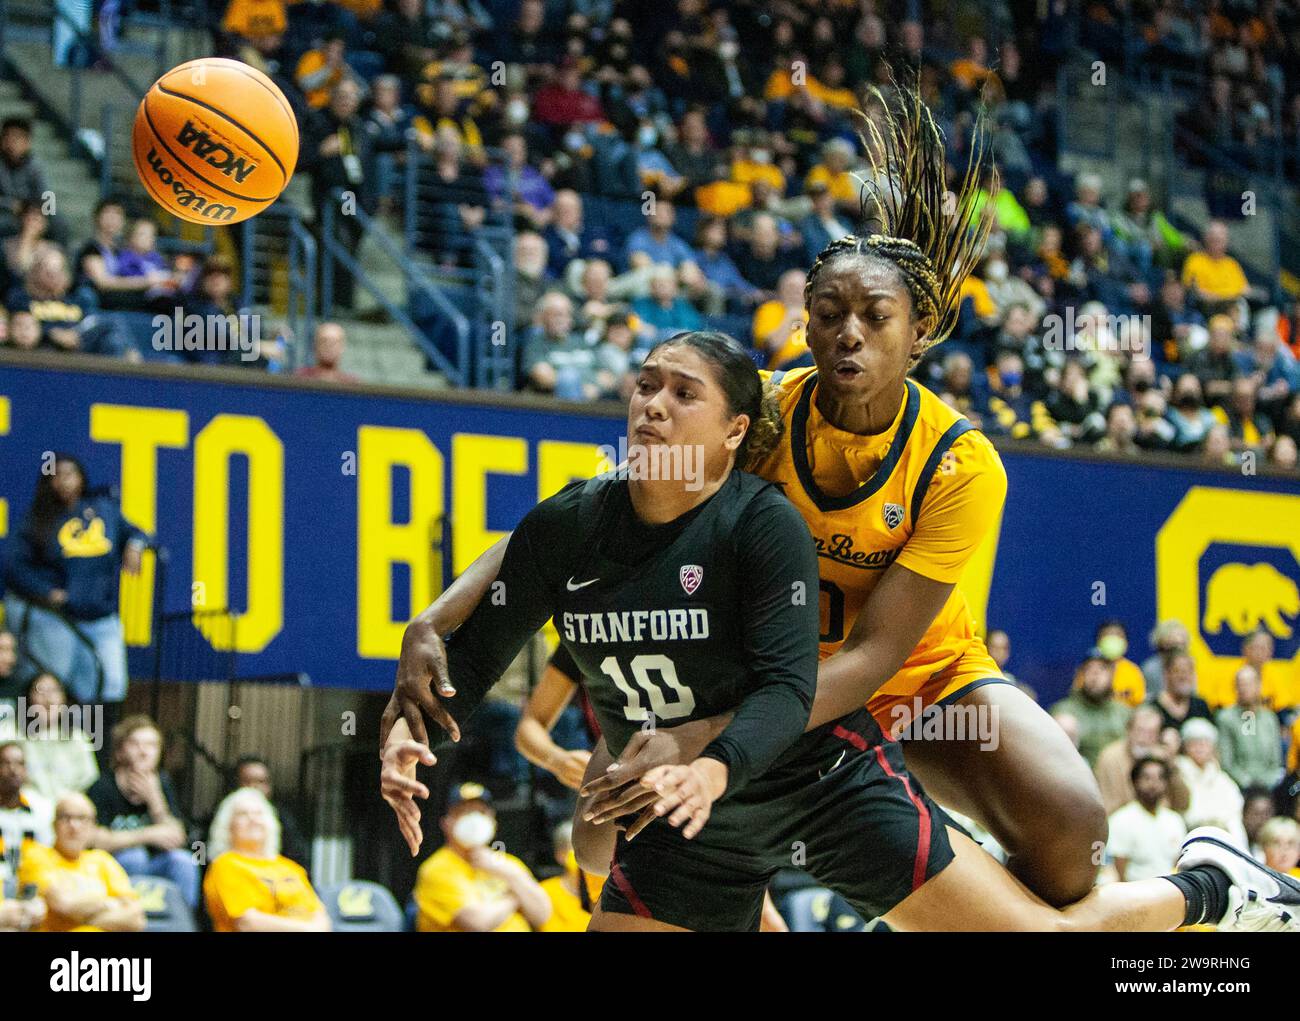 Haas Pavilion Berkeley Calif, USA. 29th Dec, 2023. CA U.S.A. Stanford guard Talana Lepolo and California forward Ugonne Onyiah (0) (10) battles for a loose ball during the NCAA Women's Basketball game between Stanford Cardinal and the California Golden Bears. Stanford beat California 78-51 at Haas Pavilion Berkeley Calif. Thurman James/CSM/Alamy Live News Stock Photo